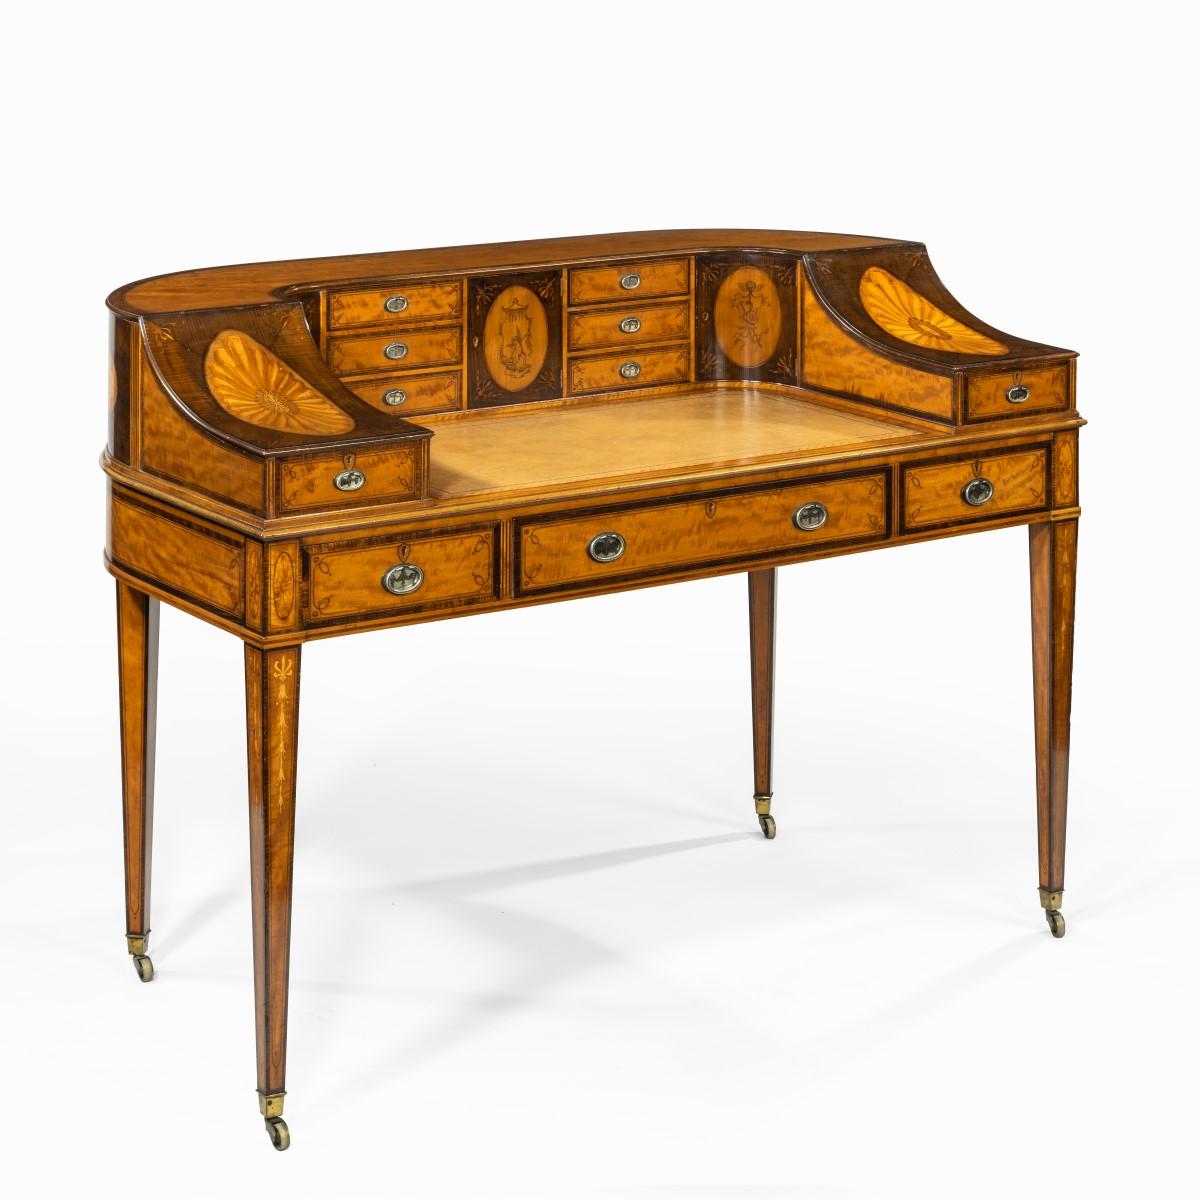 A late Victorian freestanding satinwood Carlton House desk, the curved rectangular top with the typical arrangement of six small drawers and a central cupboard around three sides, enclosing a leathered writing surface, sloping downwards to the